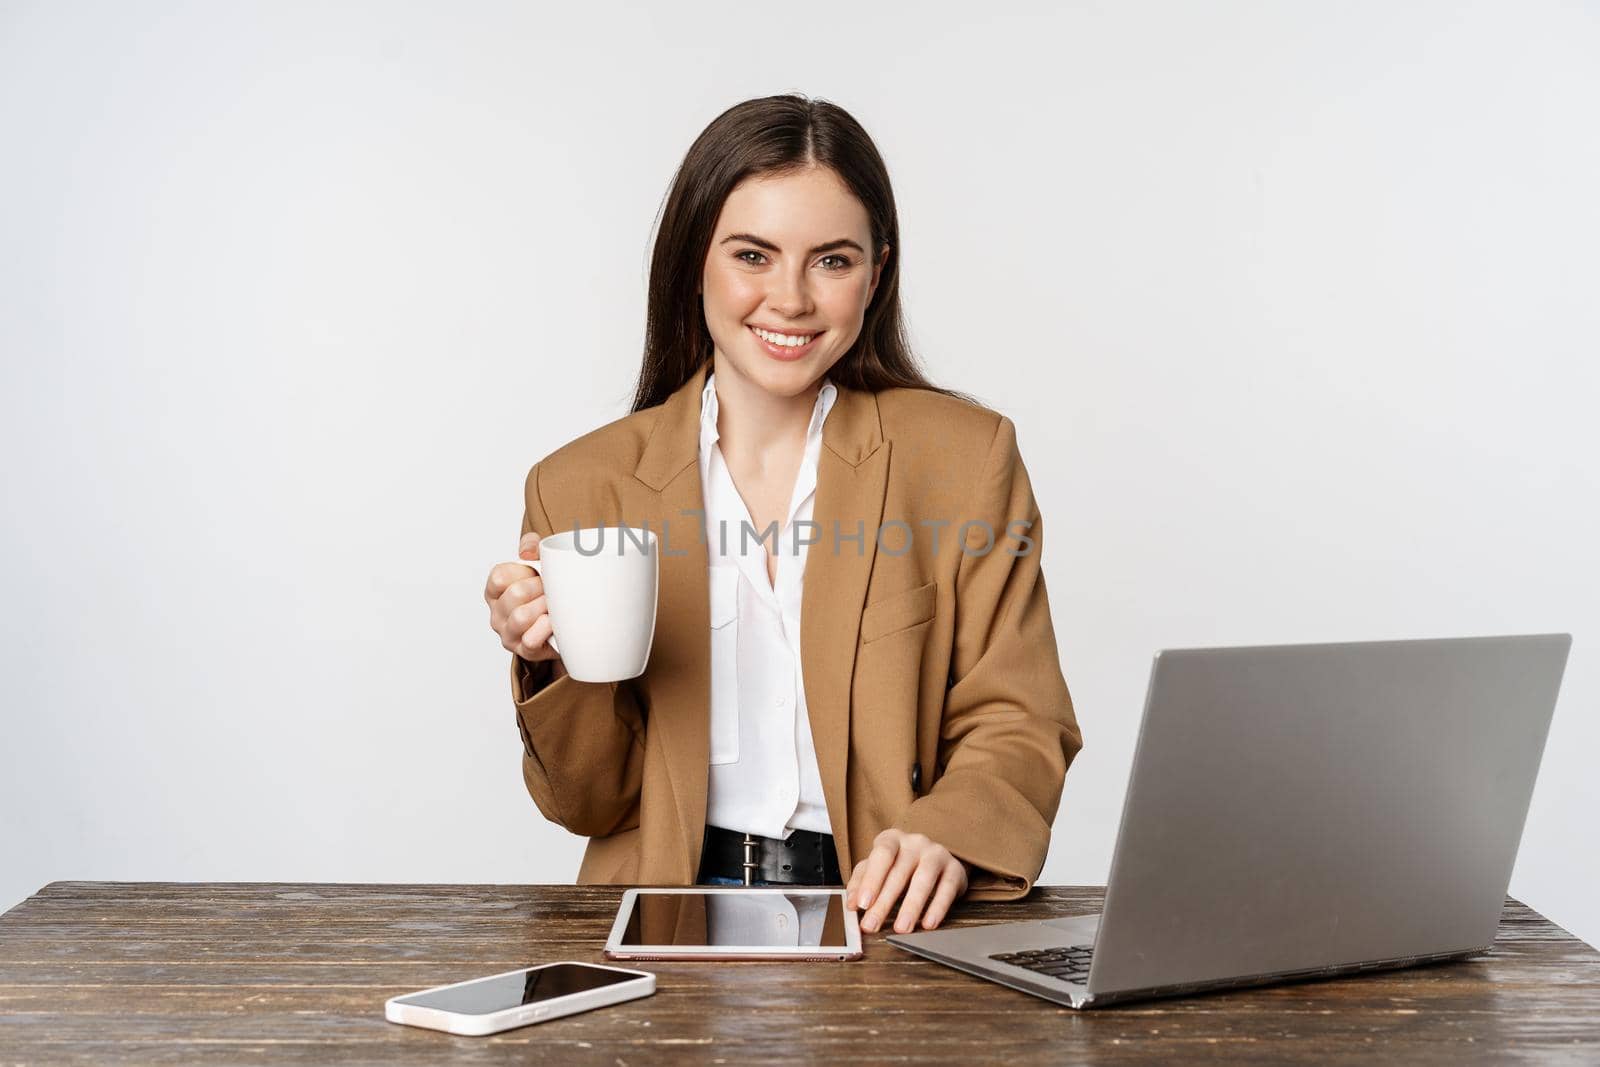 Beautiful happy office lady, business woman drinking coffee at work, sitting at table and smiling pleased, holding white mug, studio background.